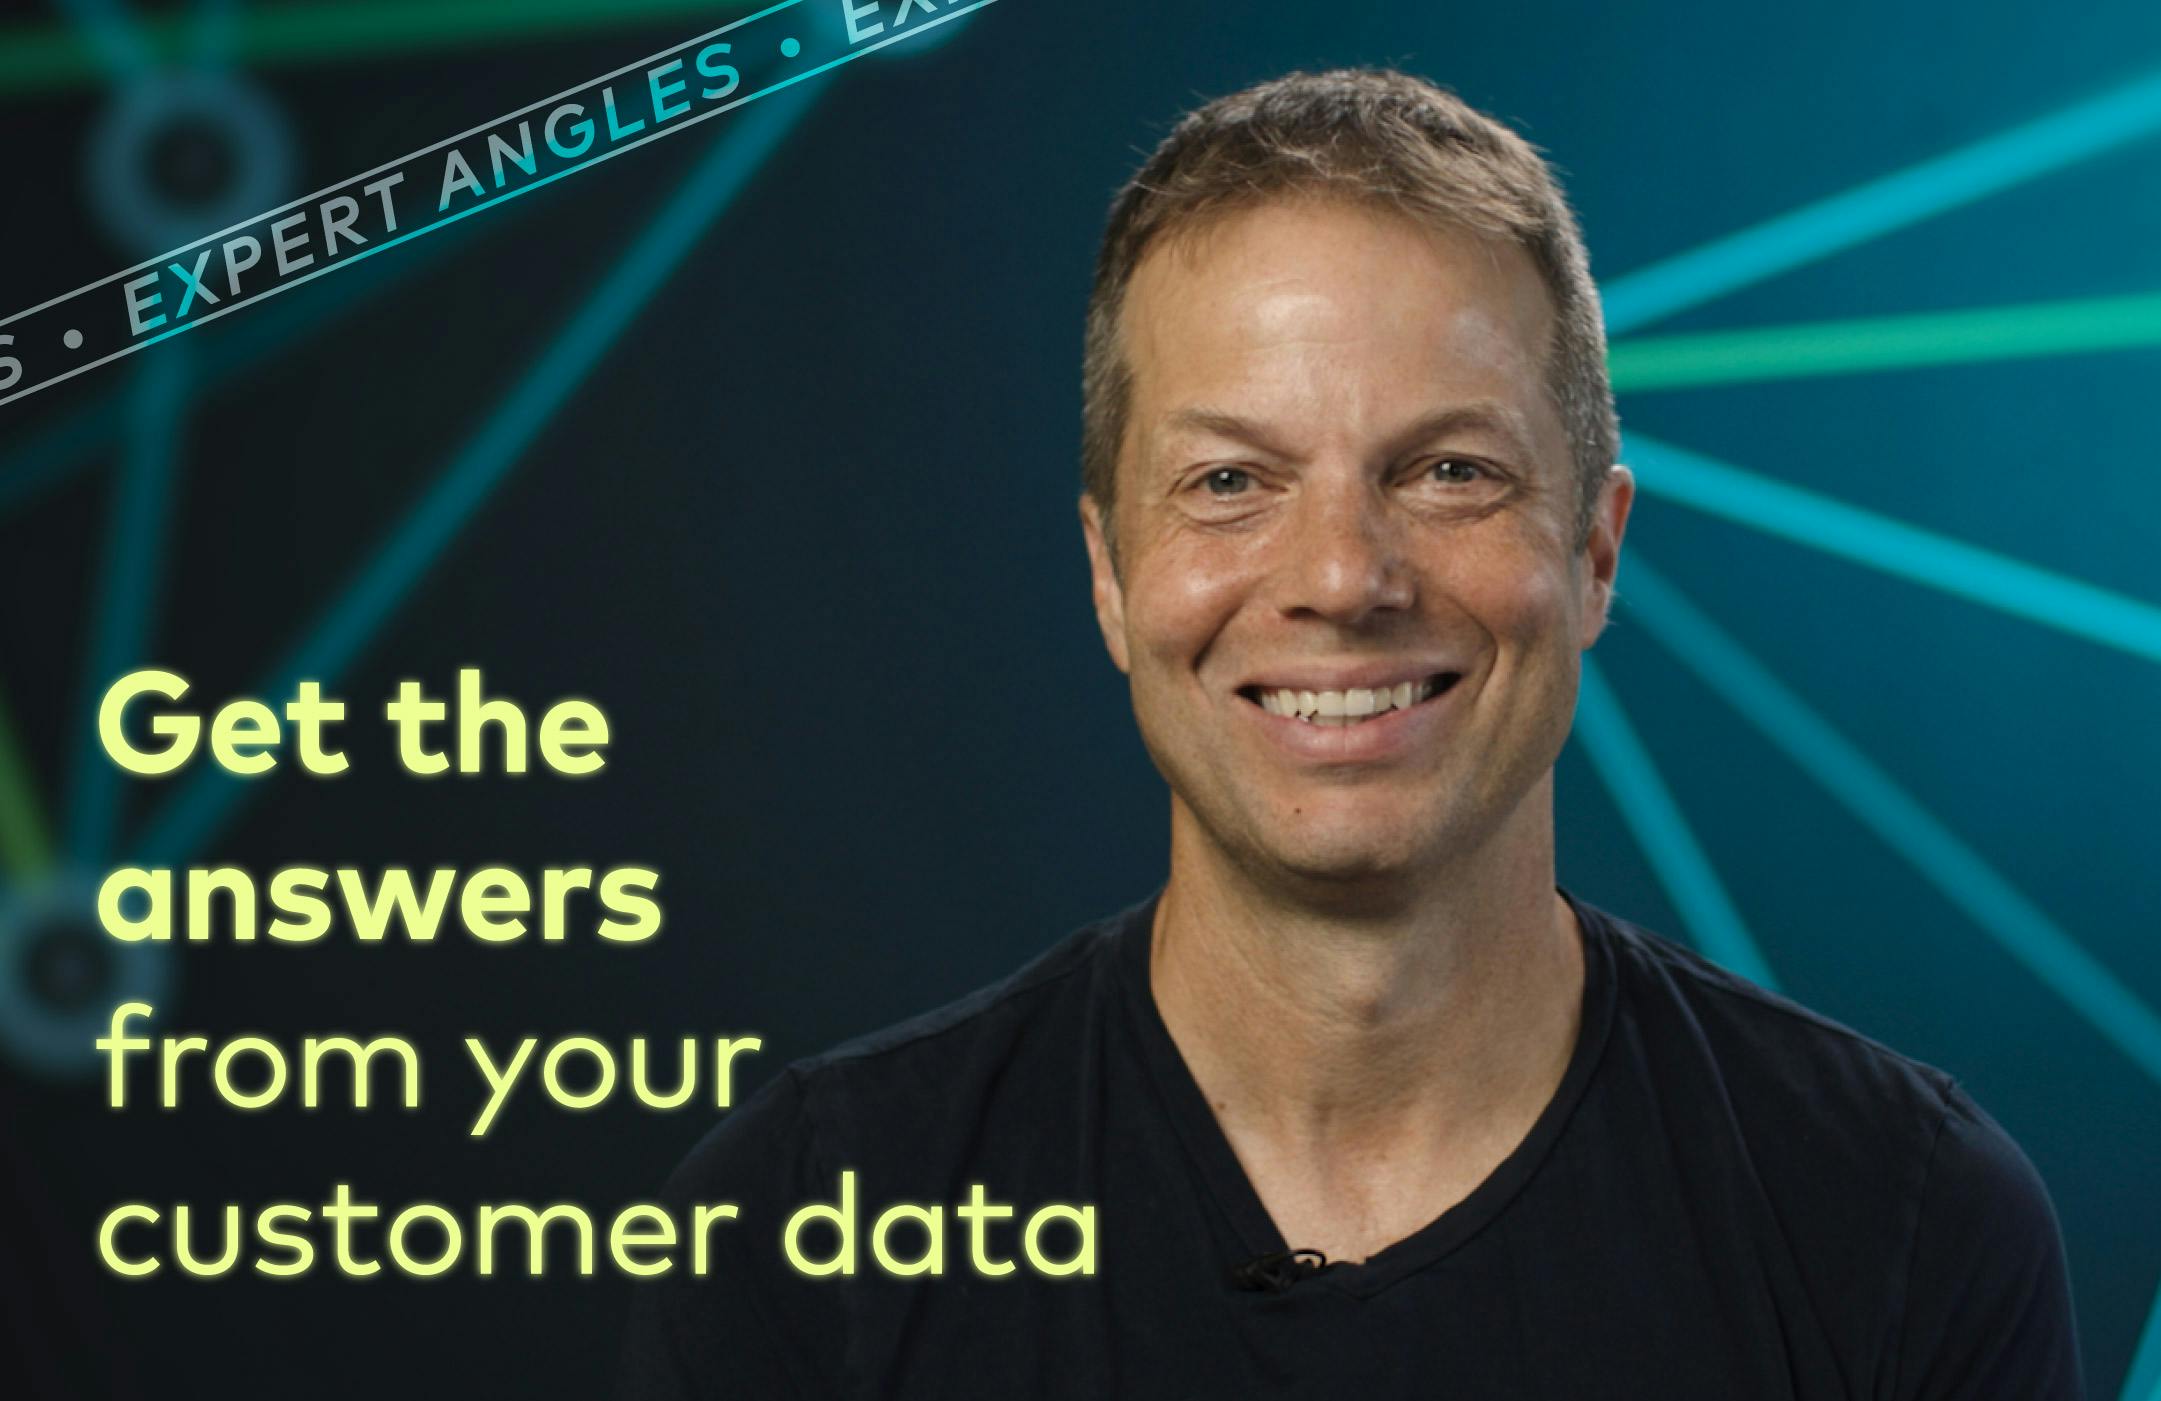 Get the answers from your customer data